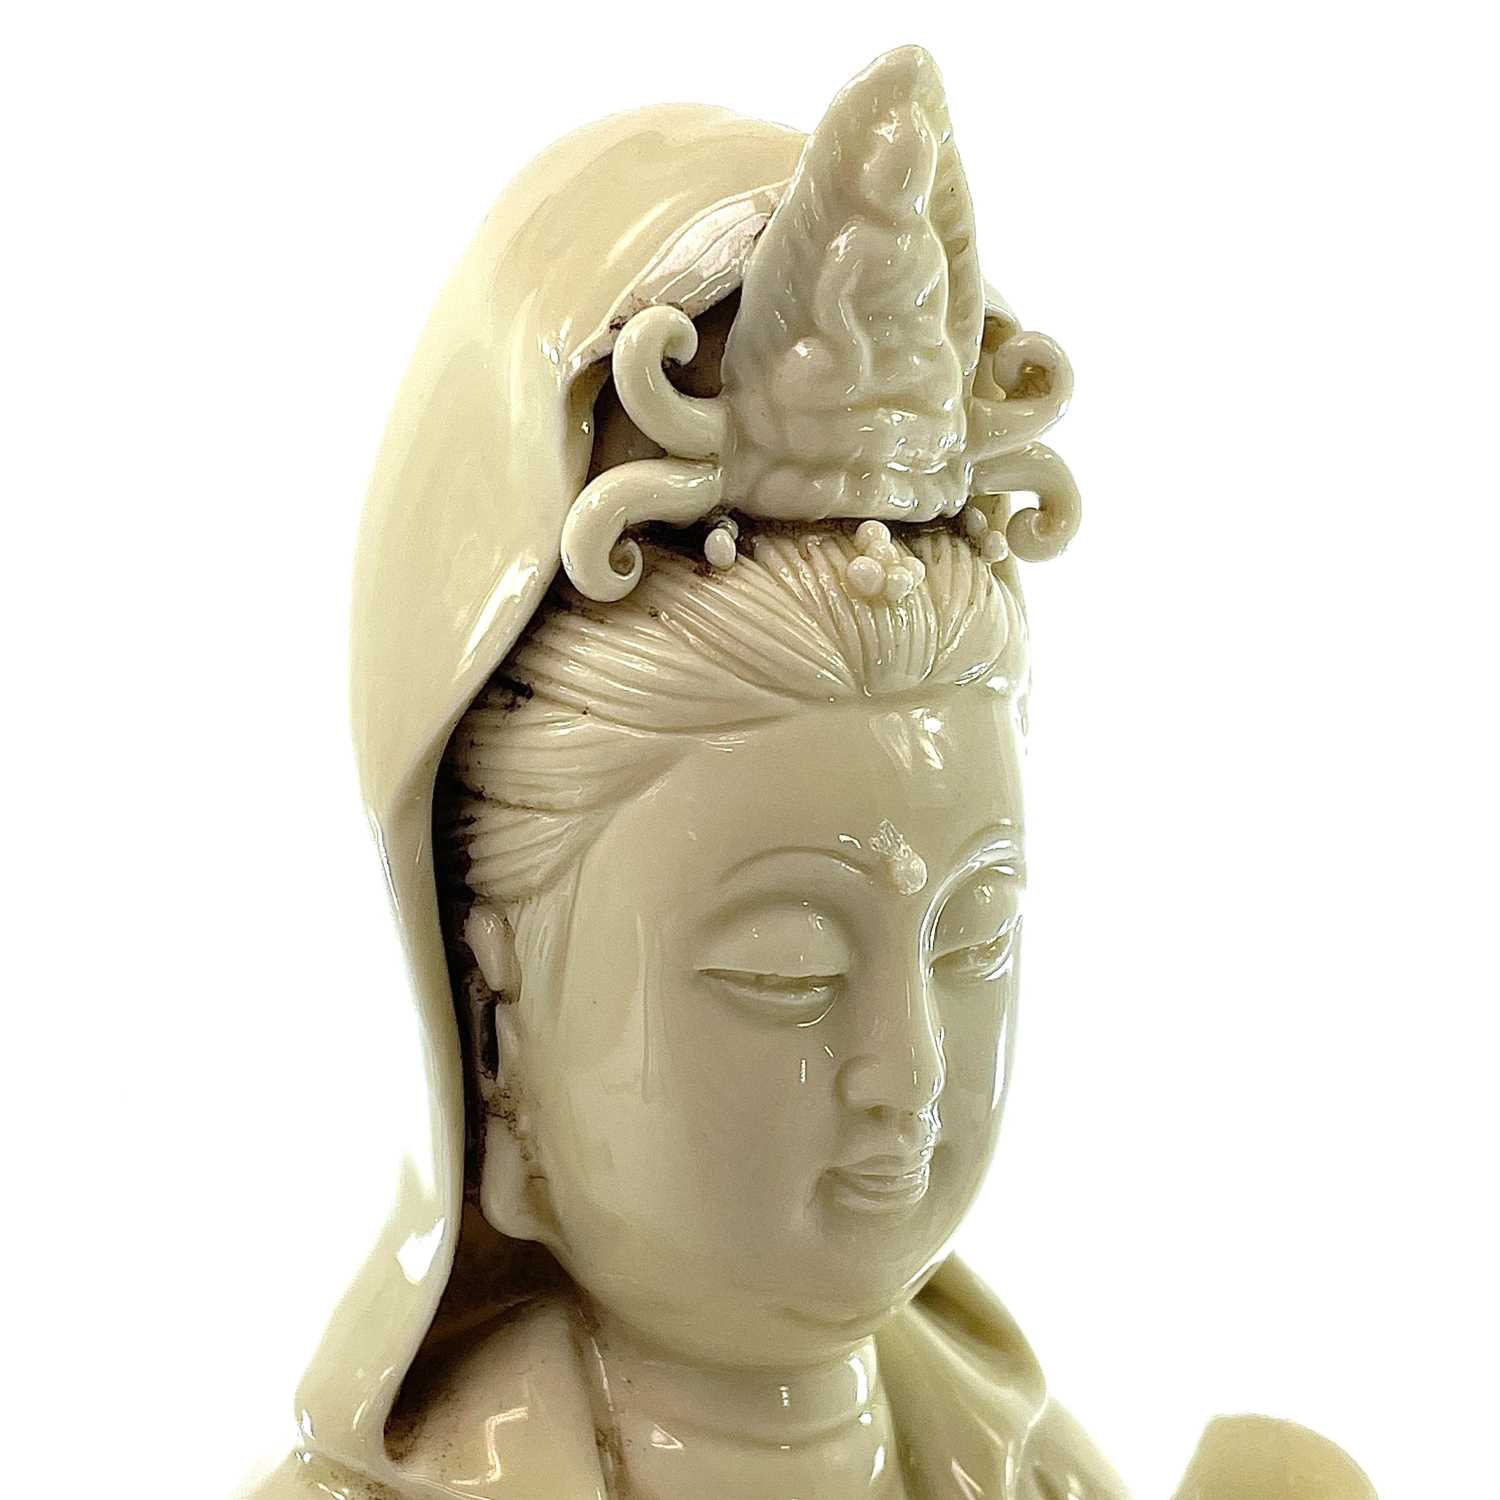 A Chinese blanc de chine figure of Guanyin, 20th century, seated with one leg raised resting her arm - Image 4 of 7